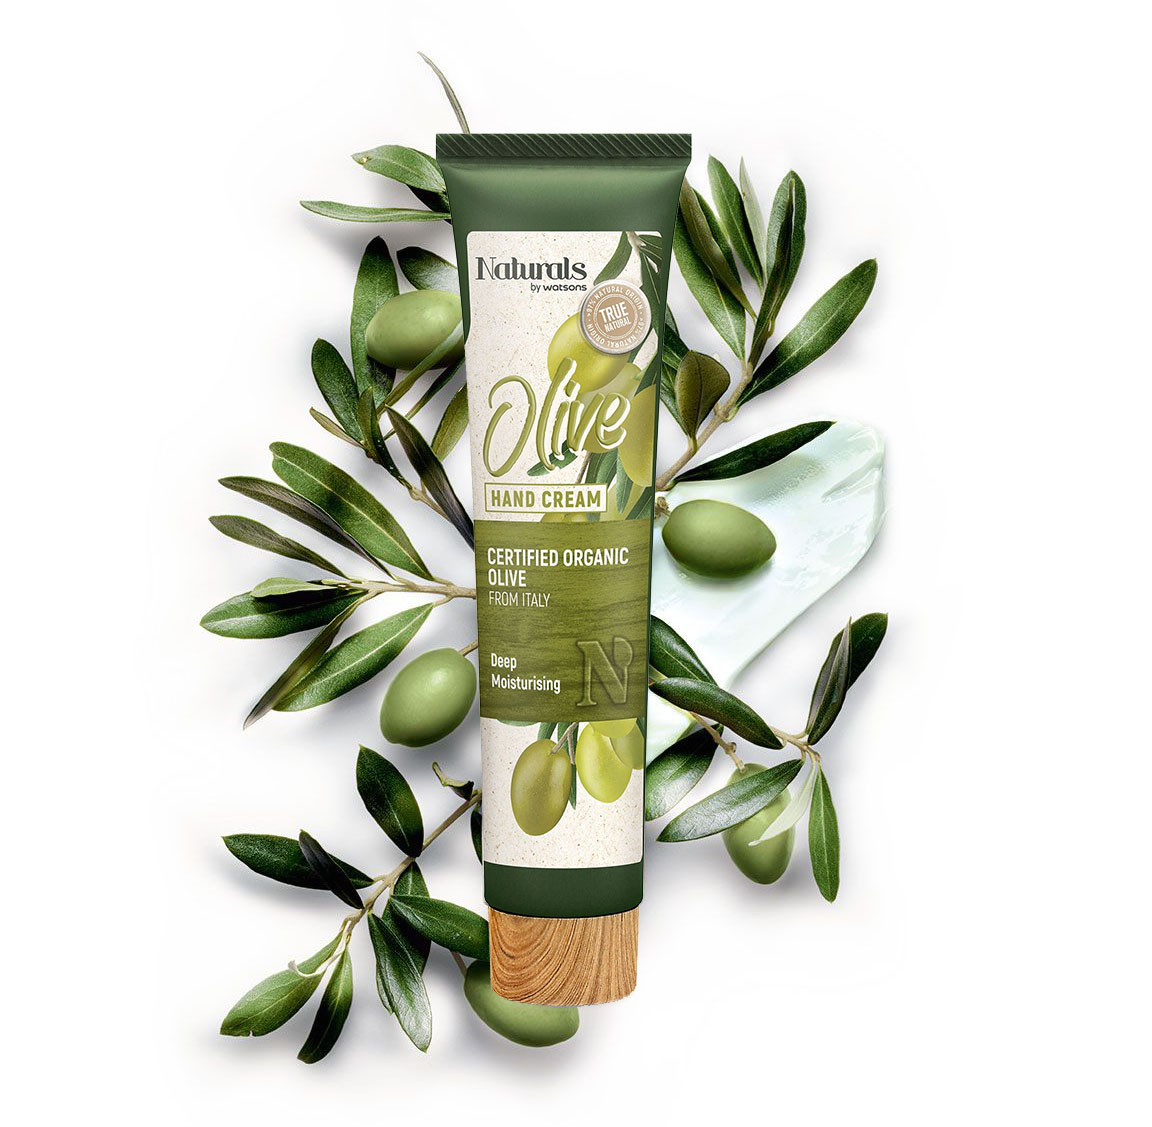 Naturals By Watsons True Natural Olive Hand Cream